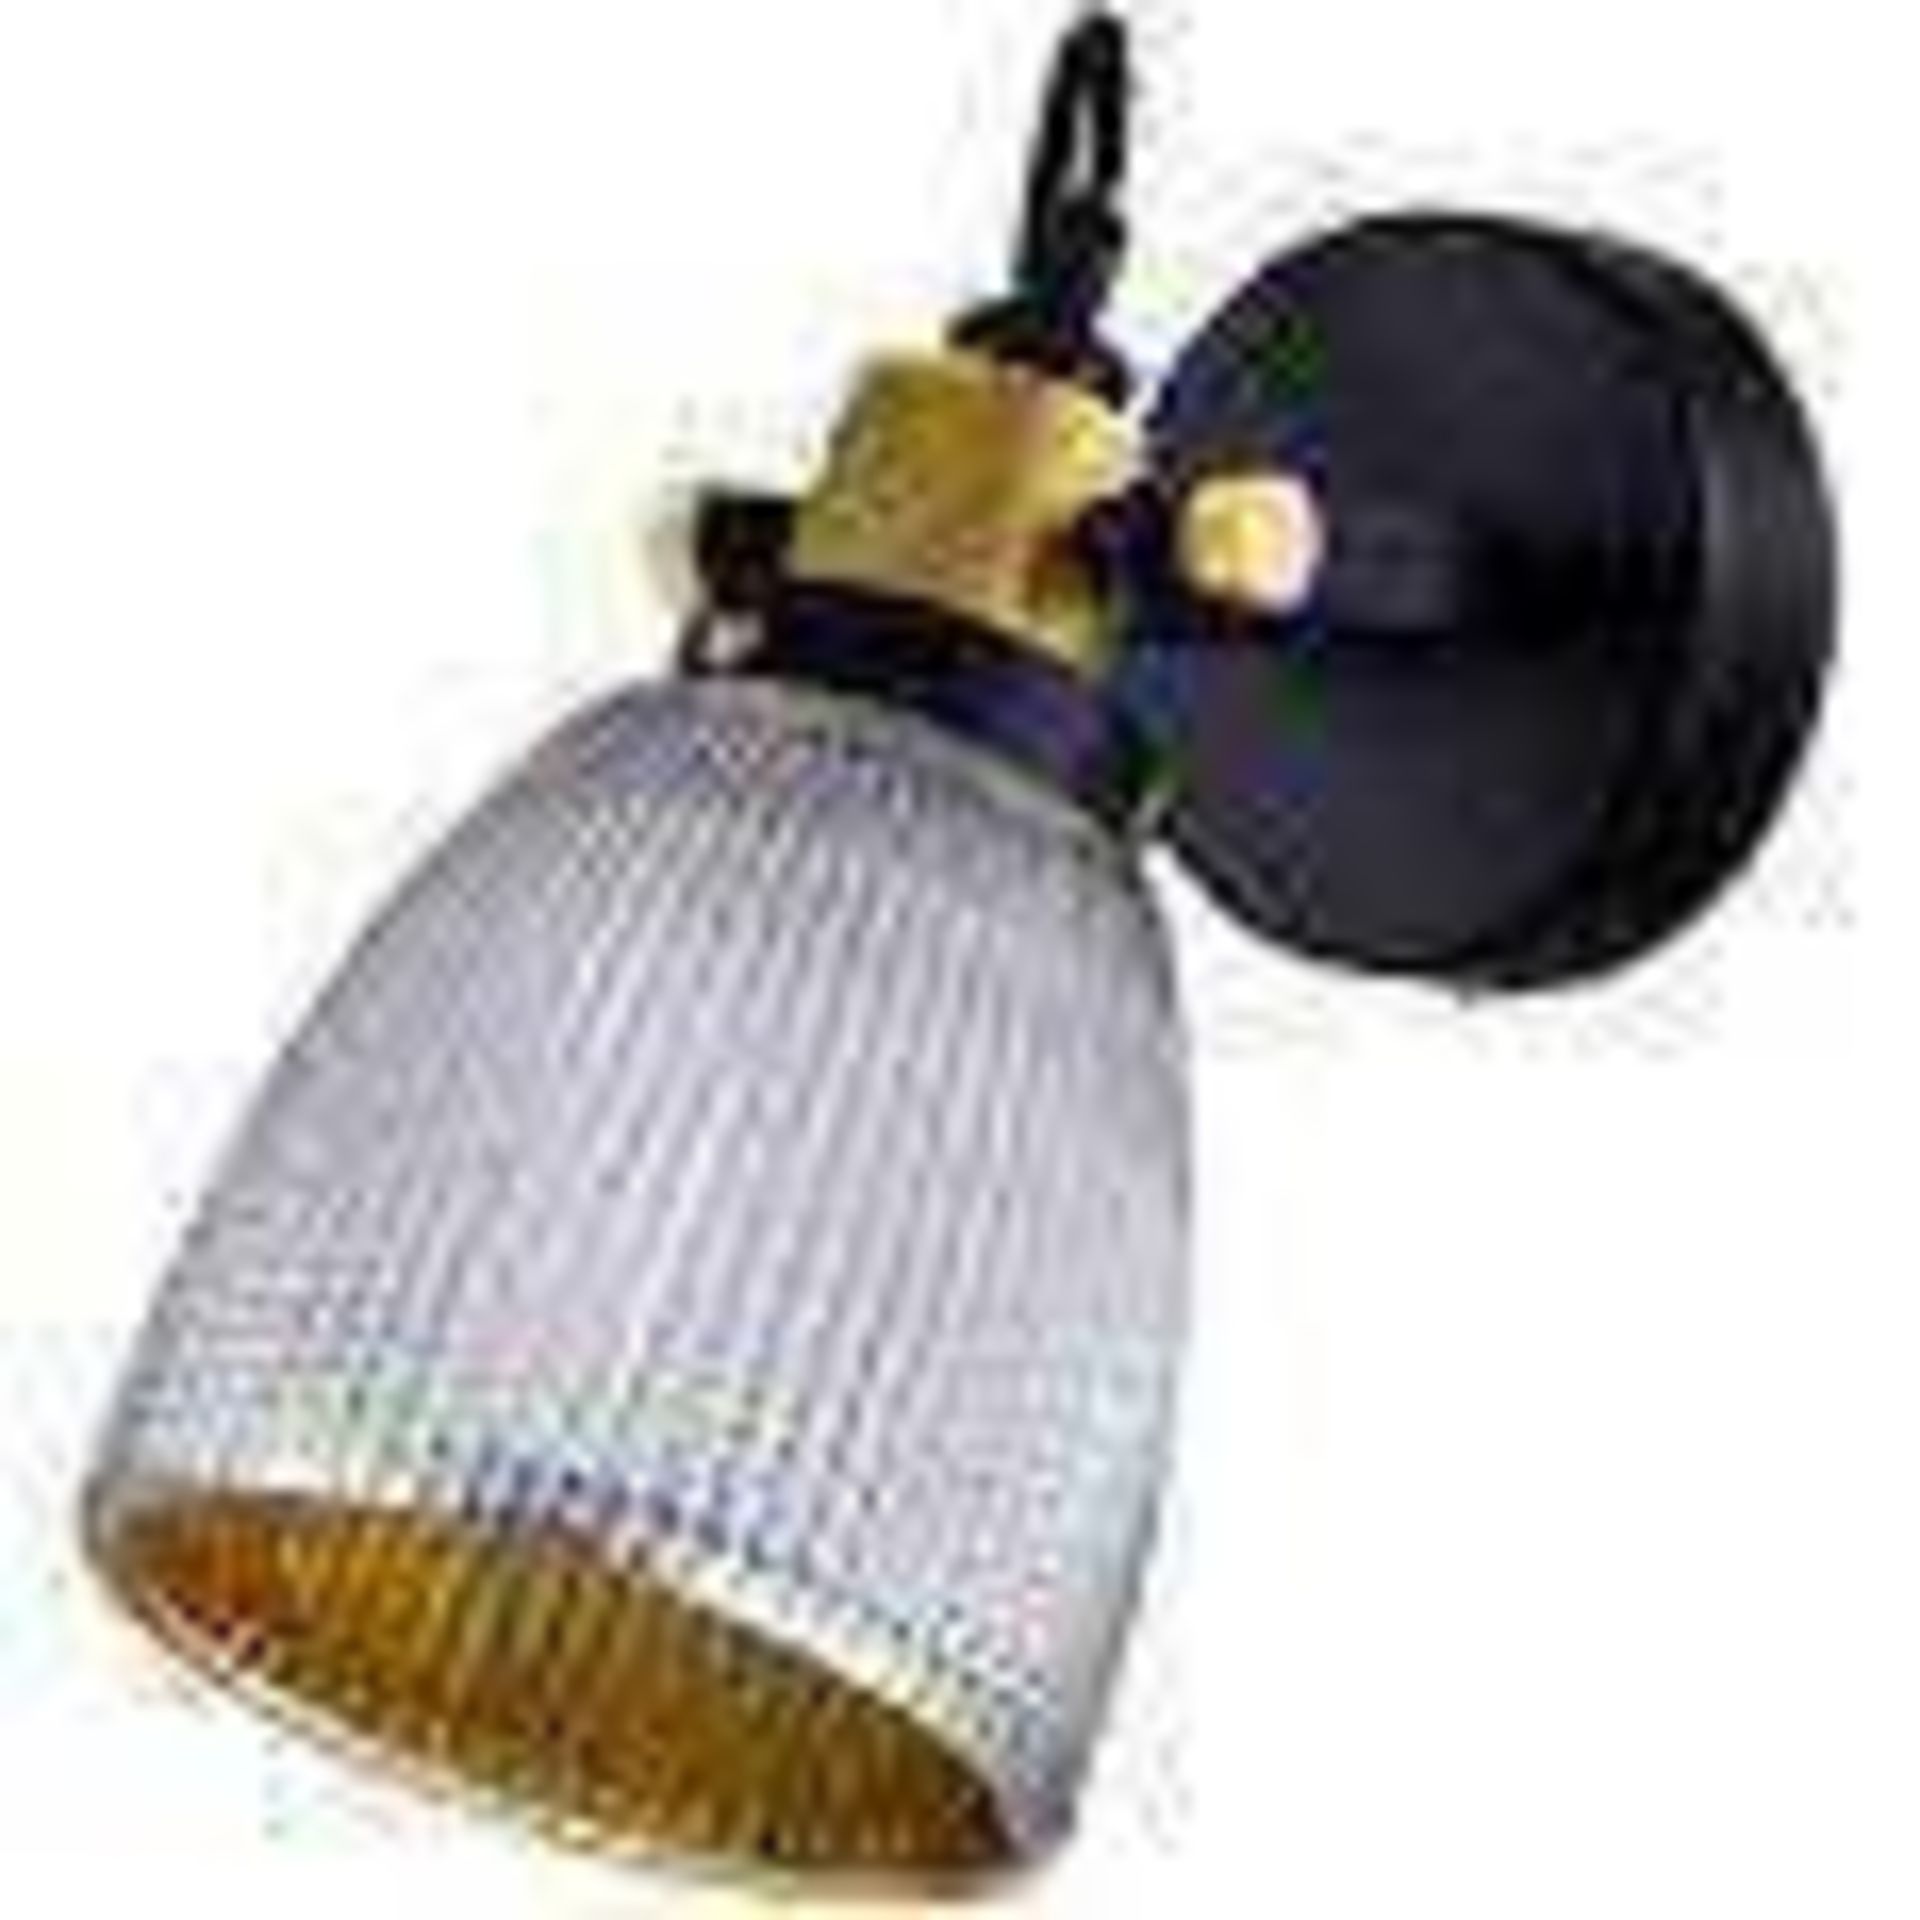 Combined Rrp £100. Lot To Contain 2 Assorted Wall Lights. - Image 2 of 2